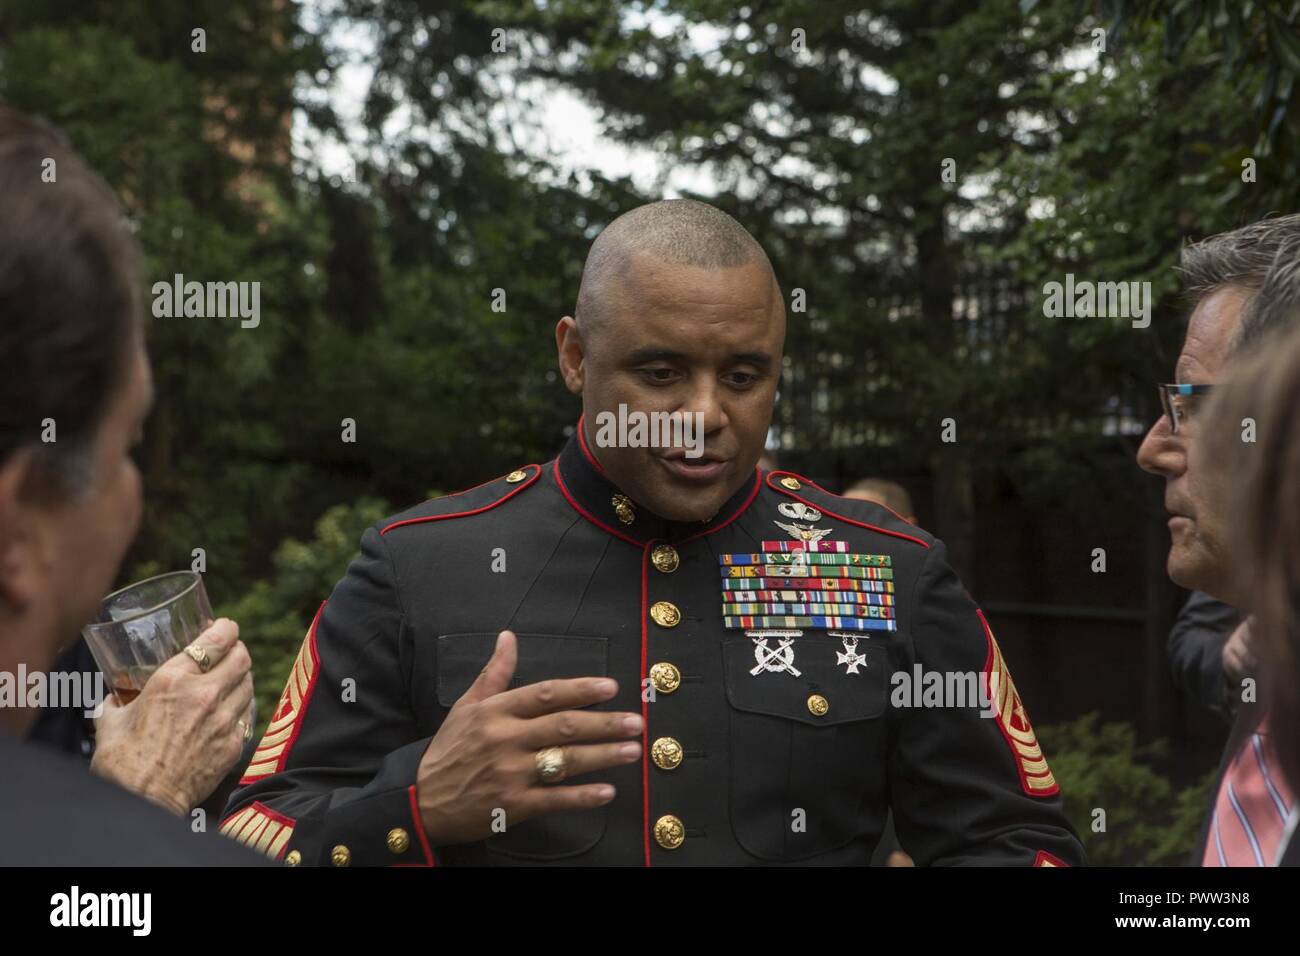 U.S. Marine Corps Sgt. Maj. Edward D. Parsons, sergeant major of Headquarters and Service Battalion, speaks with guests during a reception before an evening parade at Marine Barracks Washington, Washington D.C. June 23, 2017. Evening parades are held as a means of honoring senior officials distinguished citizens and supporters of the Marine Corps. Stock Photo